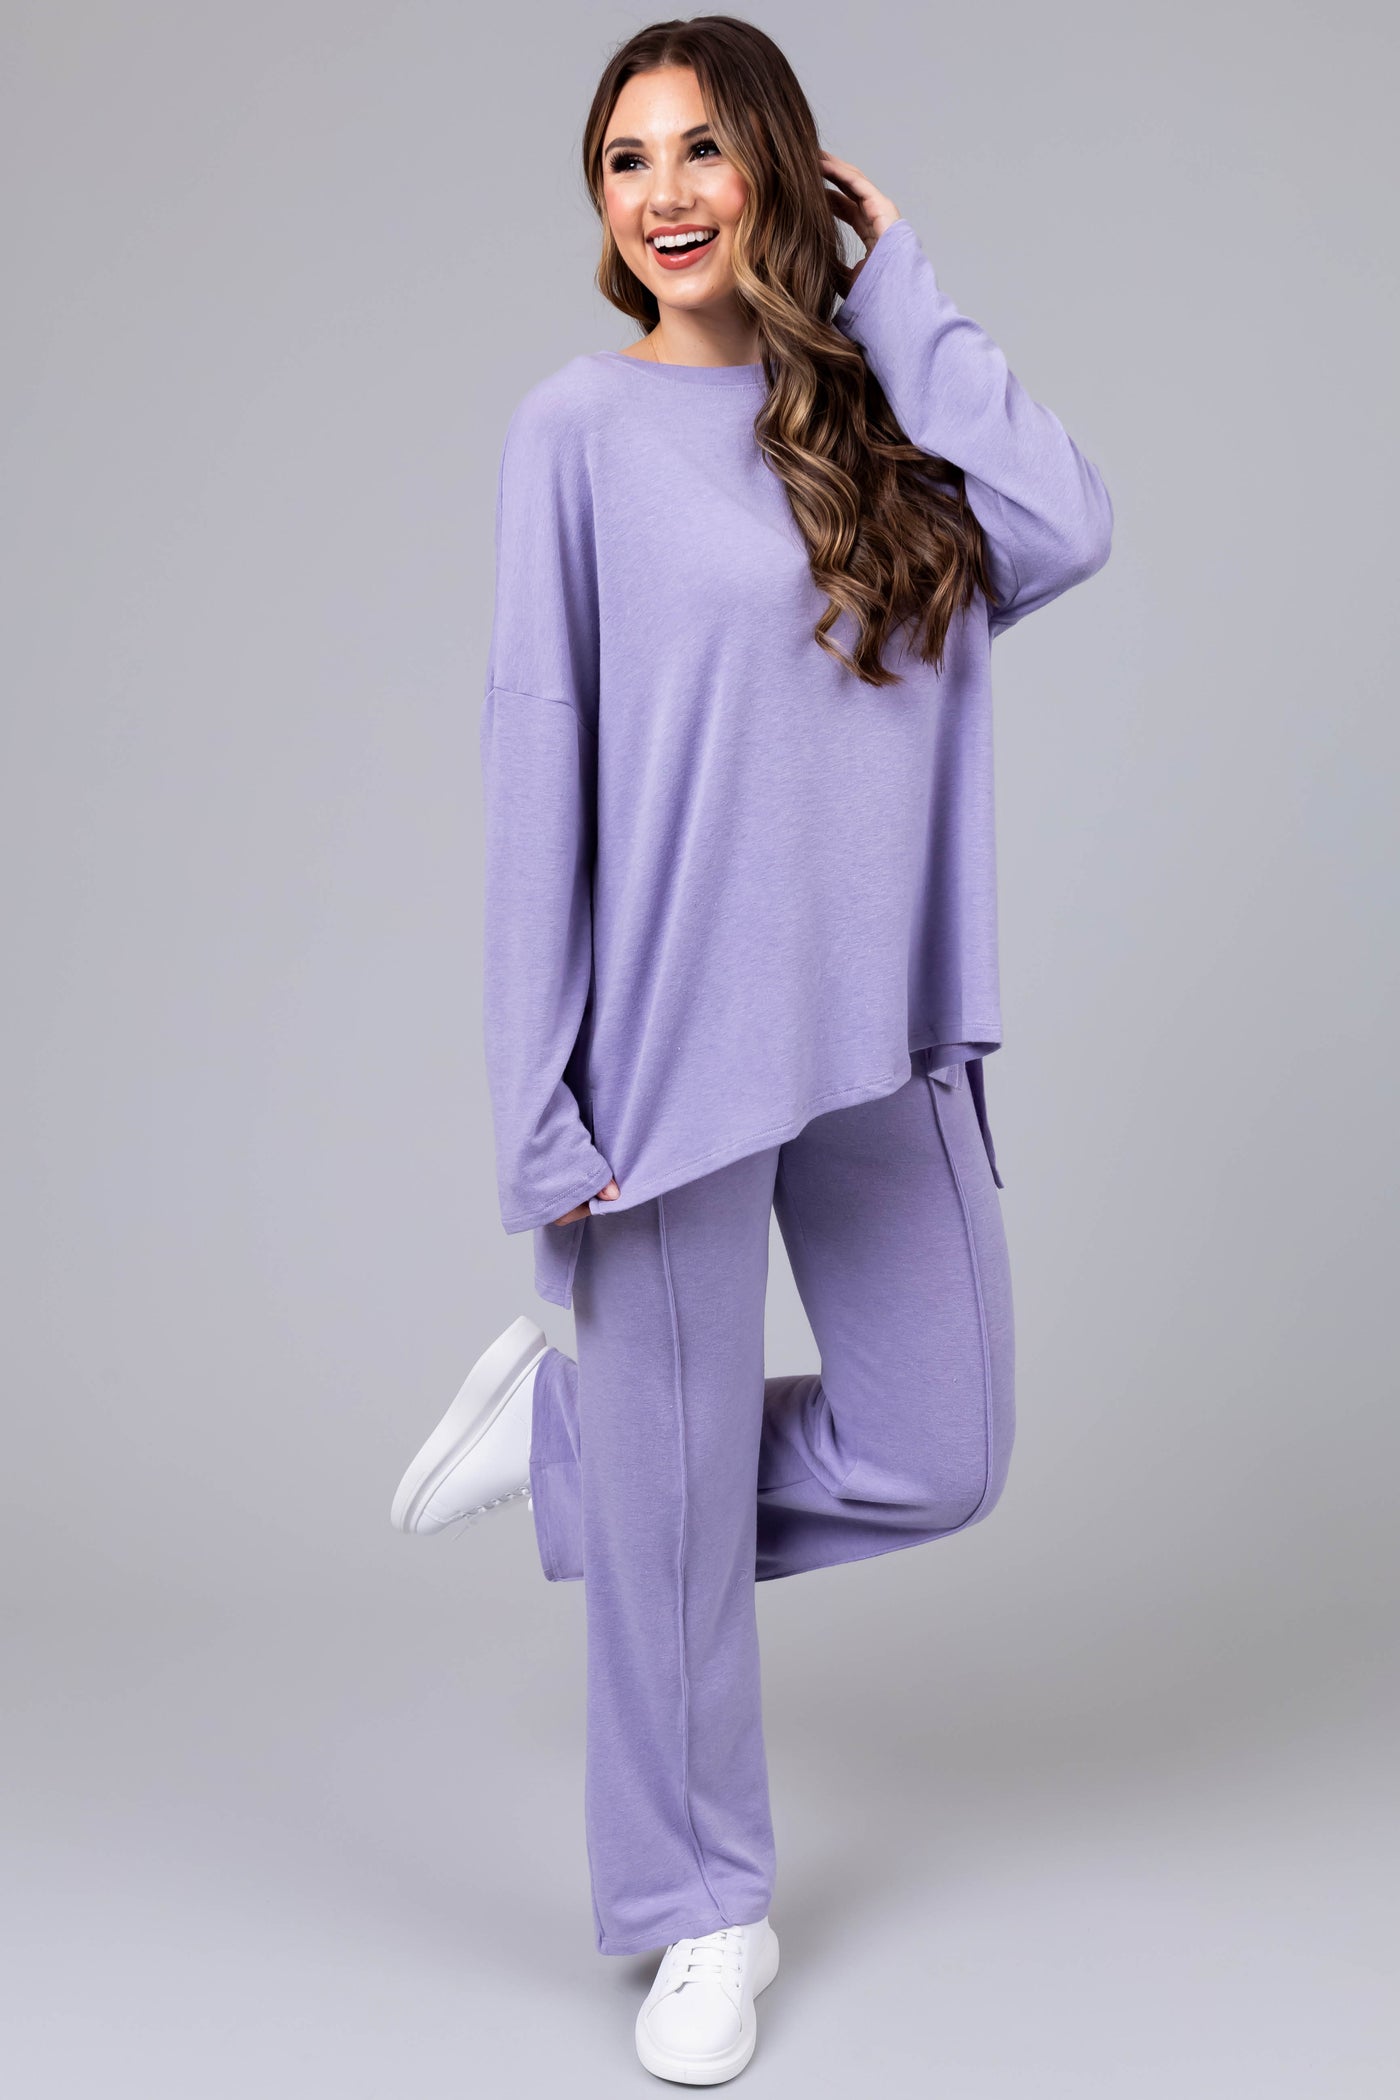 Periwinkle Soft Loungewear Top and Pants Set